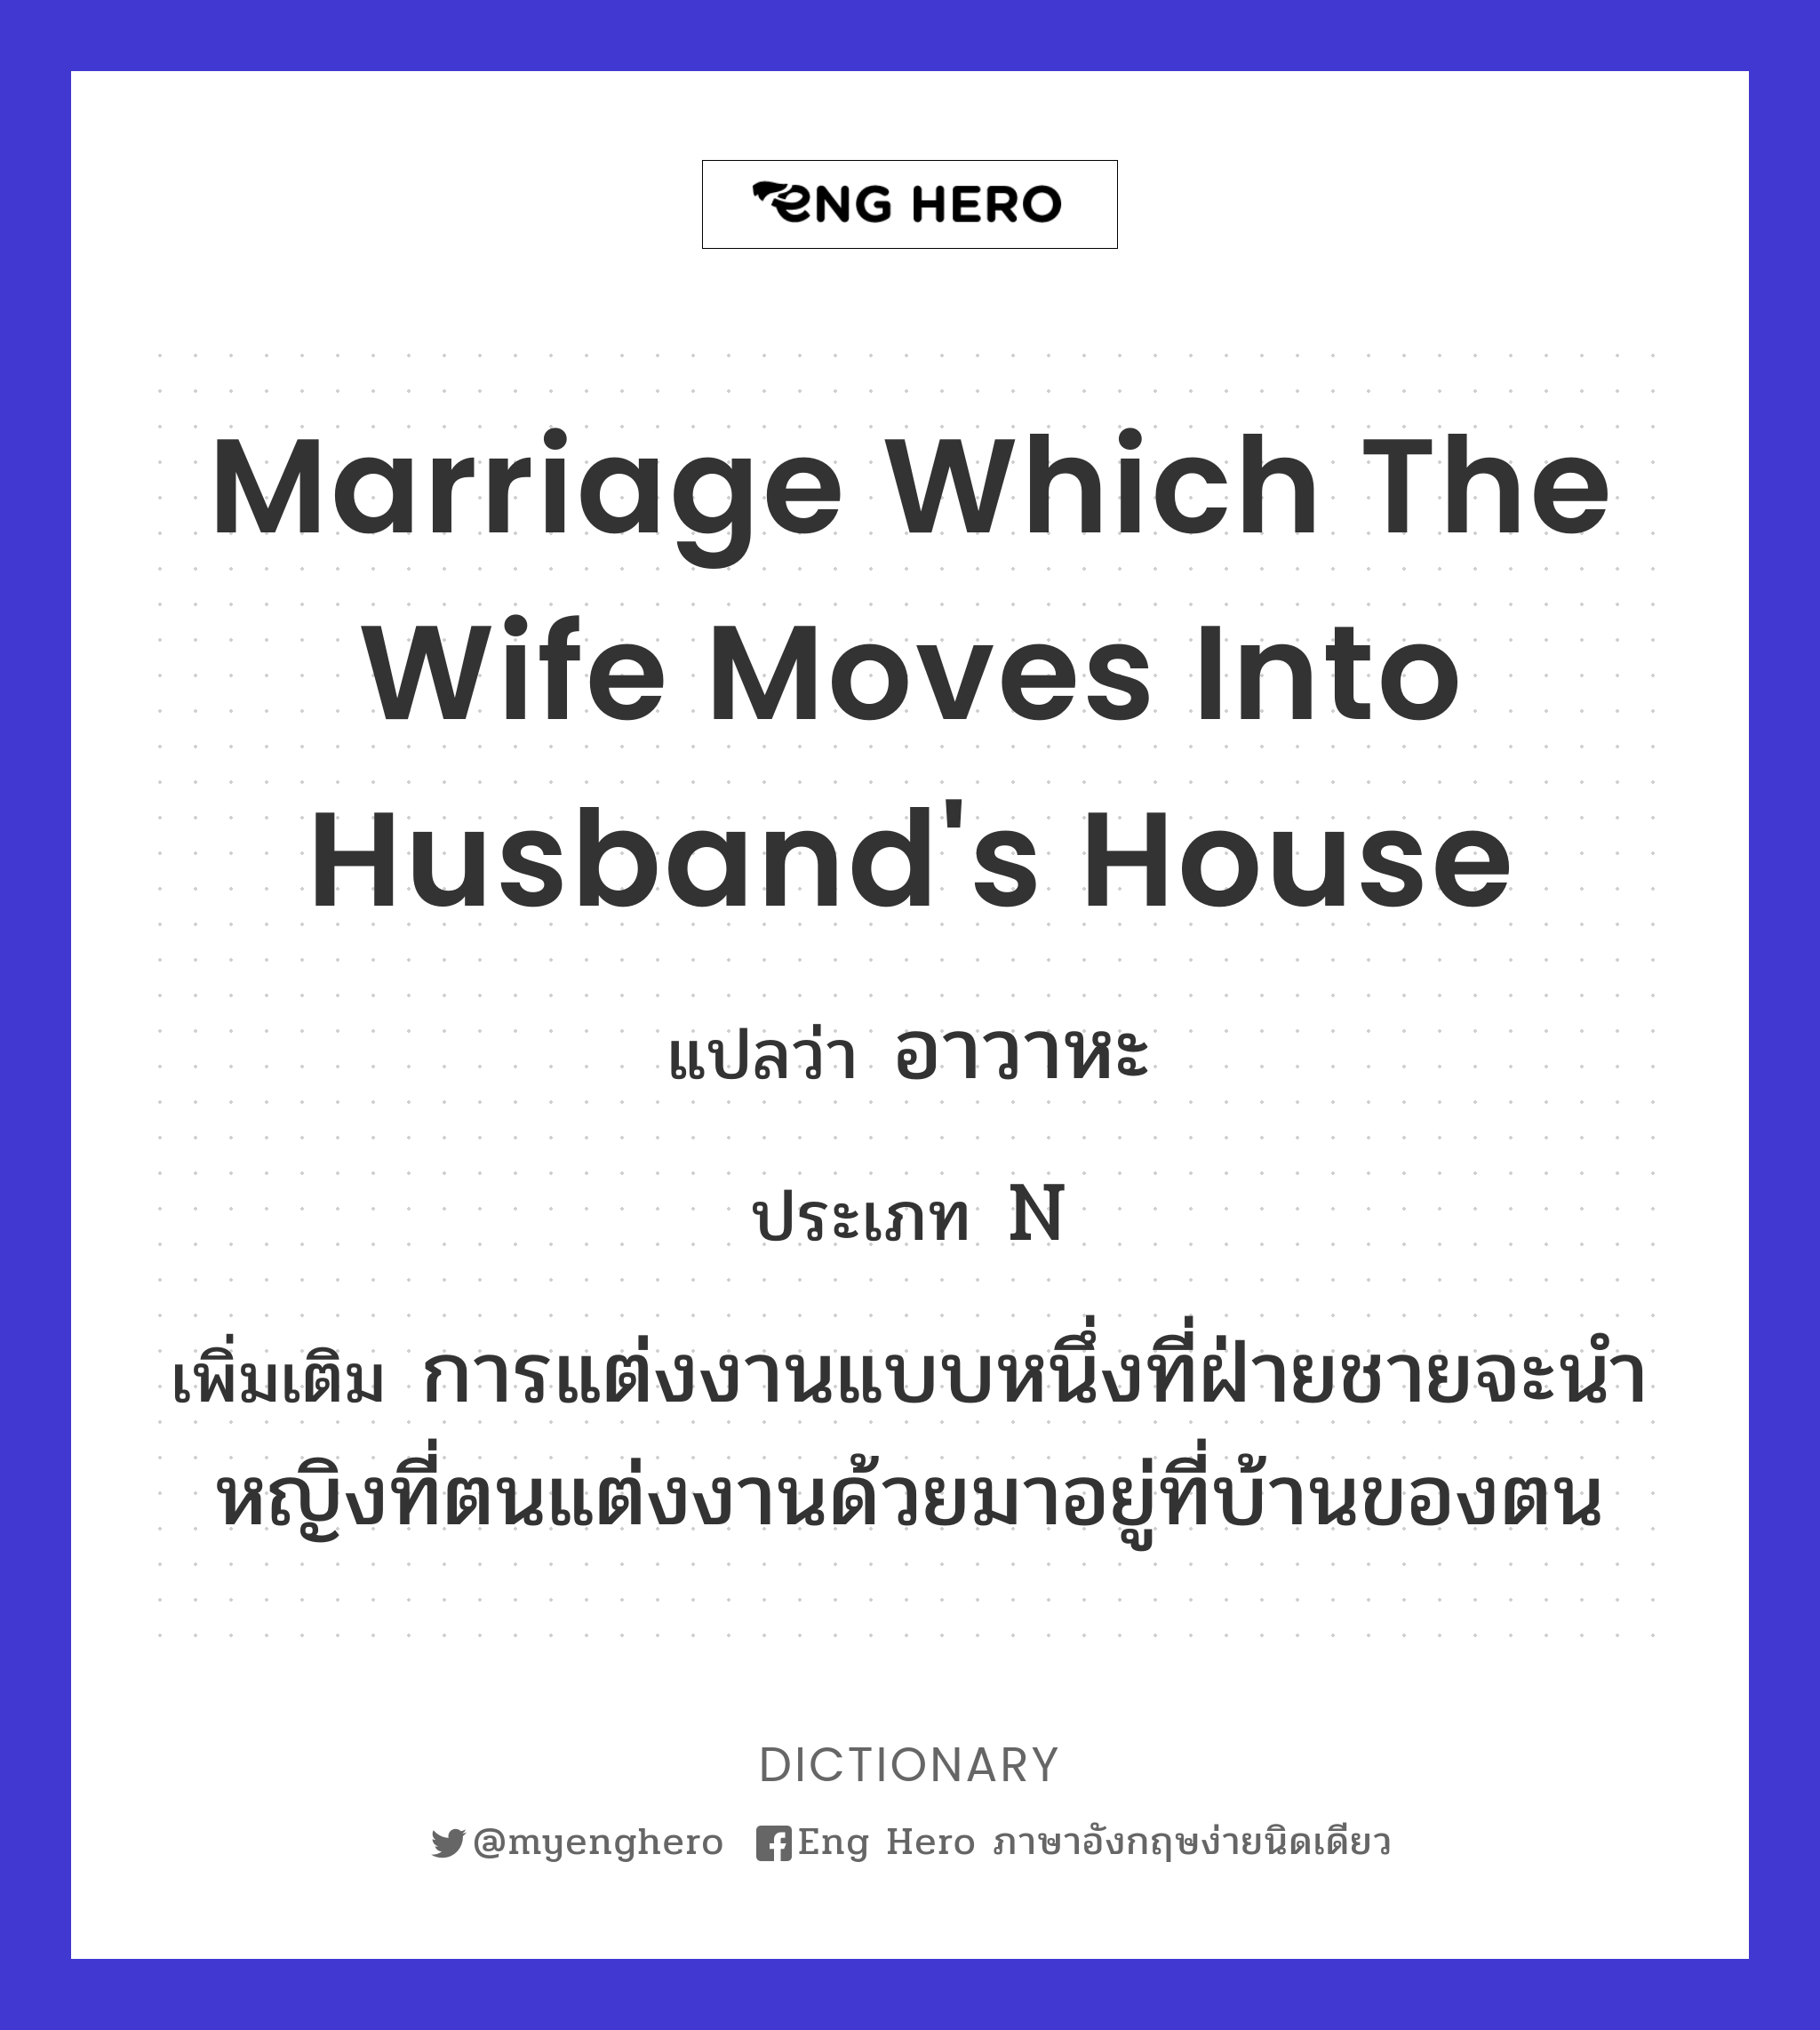 marriage which the wife moves into husband's house